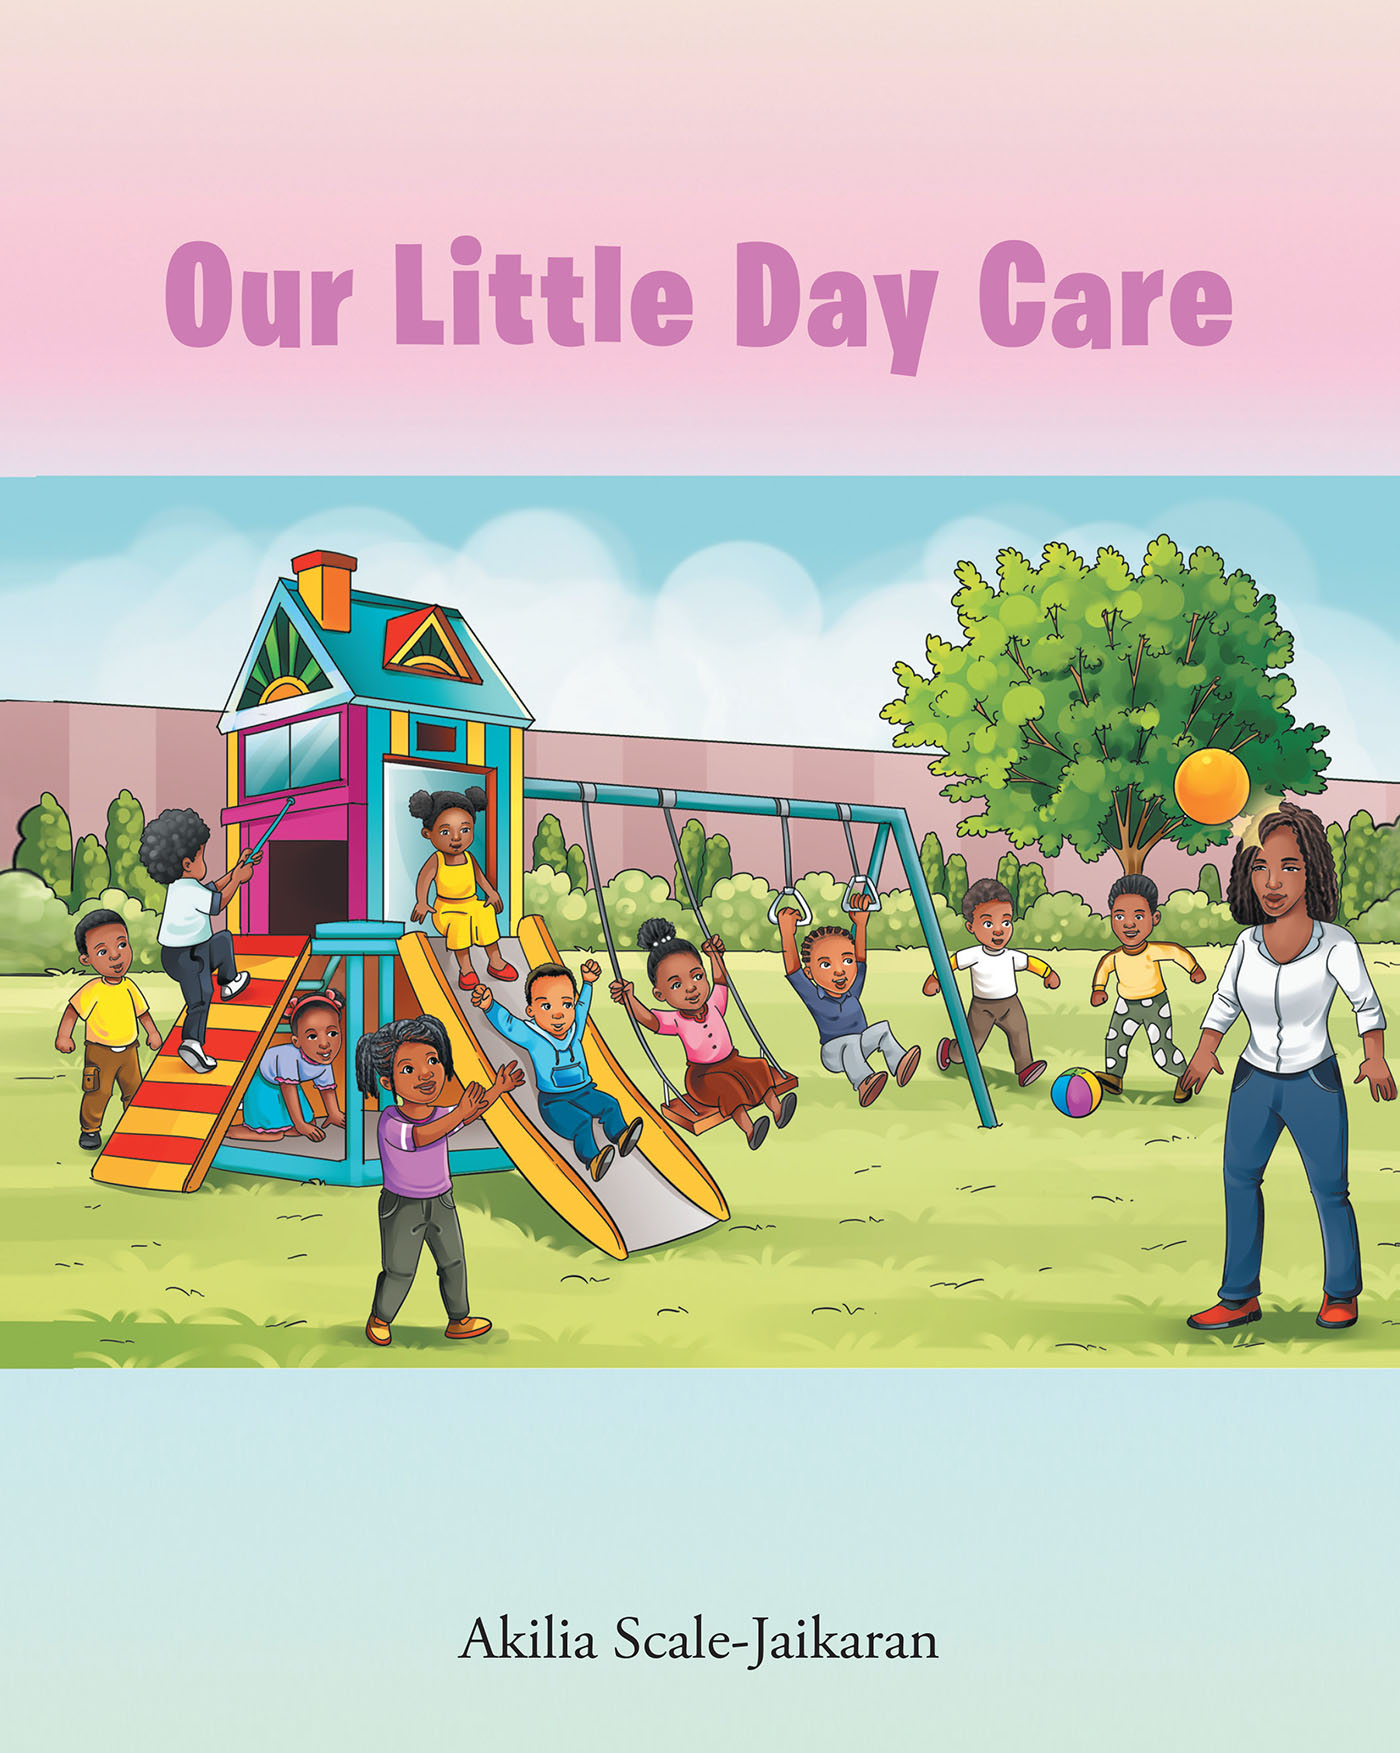 Akilia Scale-Jaikaran’s Newly Released "Our Little Day Care" is a Charming Story of the Community Built Within a Nurturing Daycare